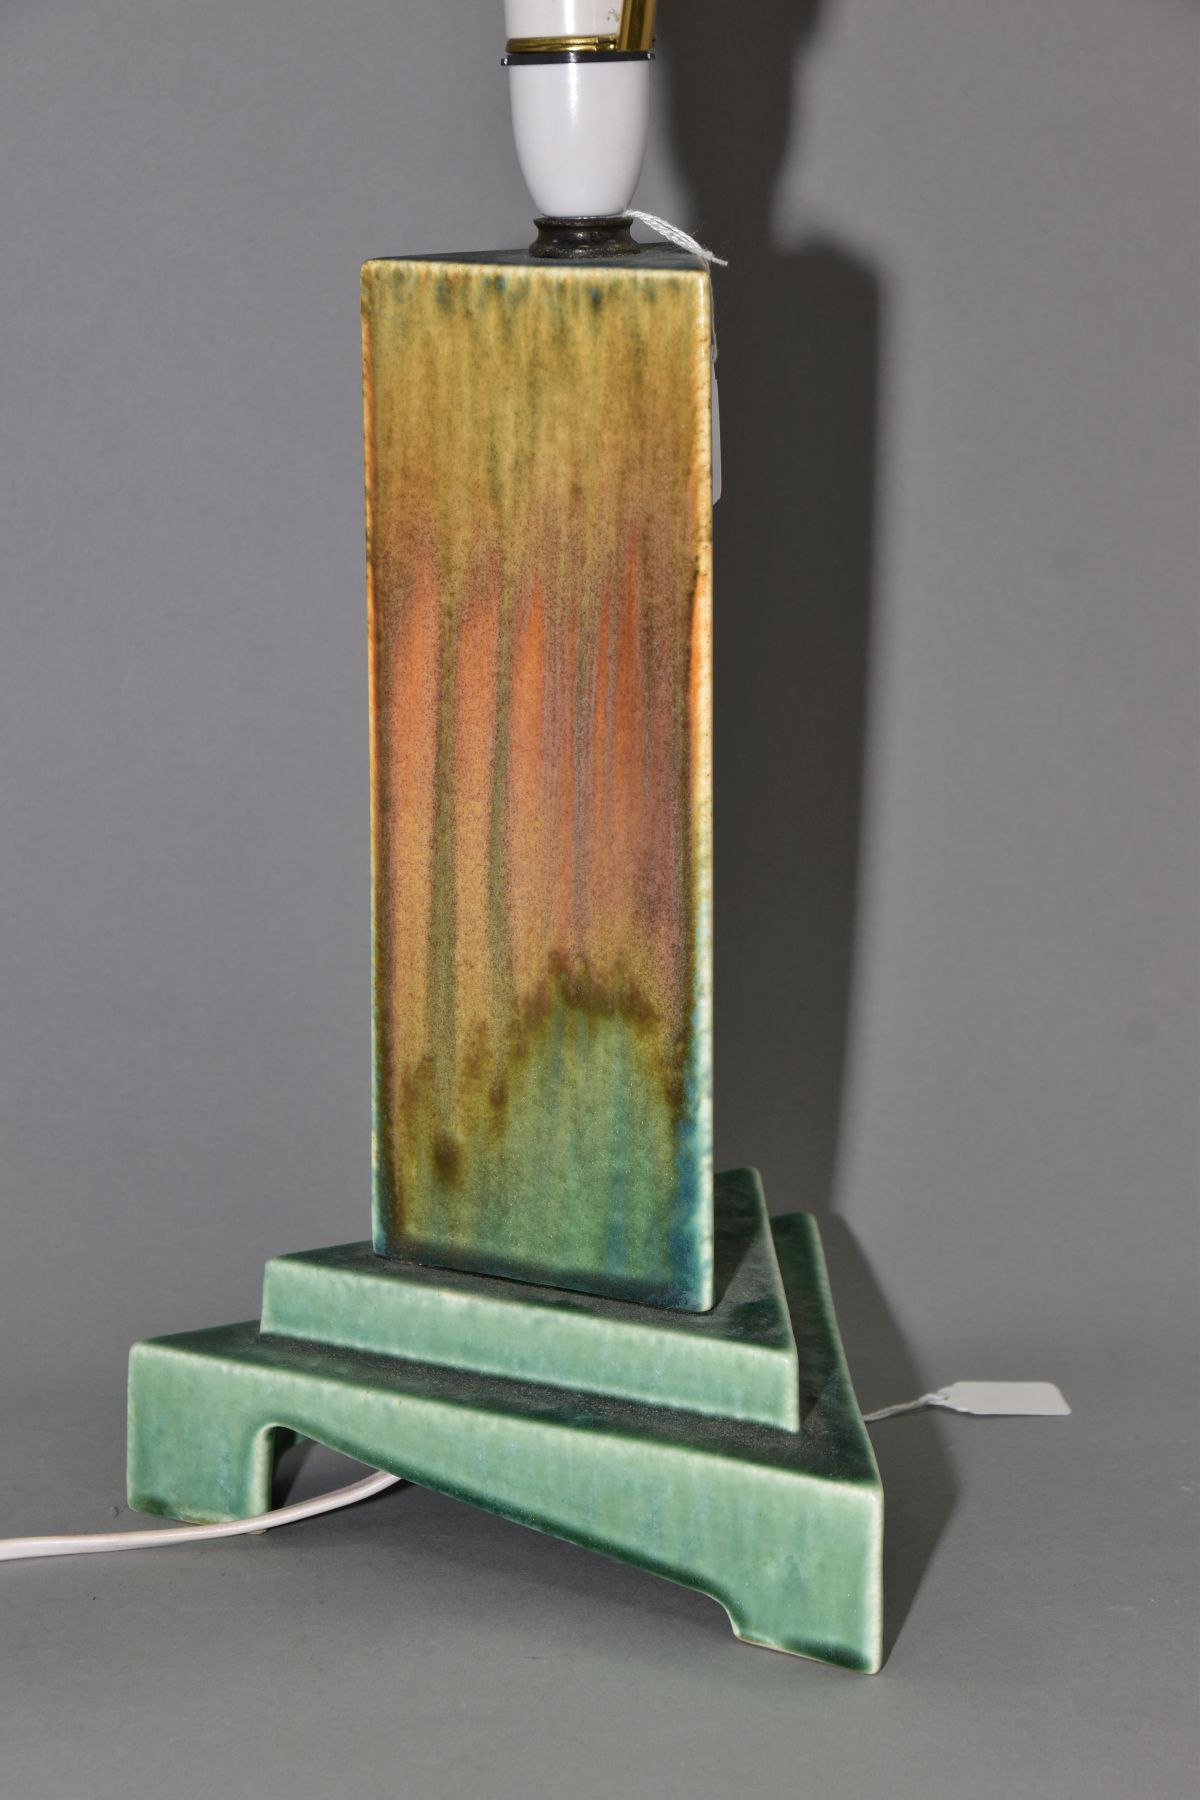 RUSKIN POTTERY, a triangular section moulded lamp base, matt green and orange gloss crystalline - Image 3 of 7